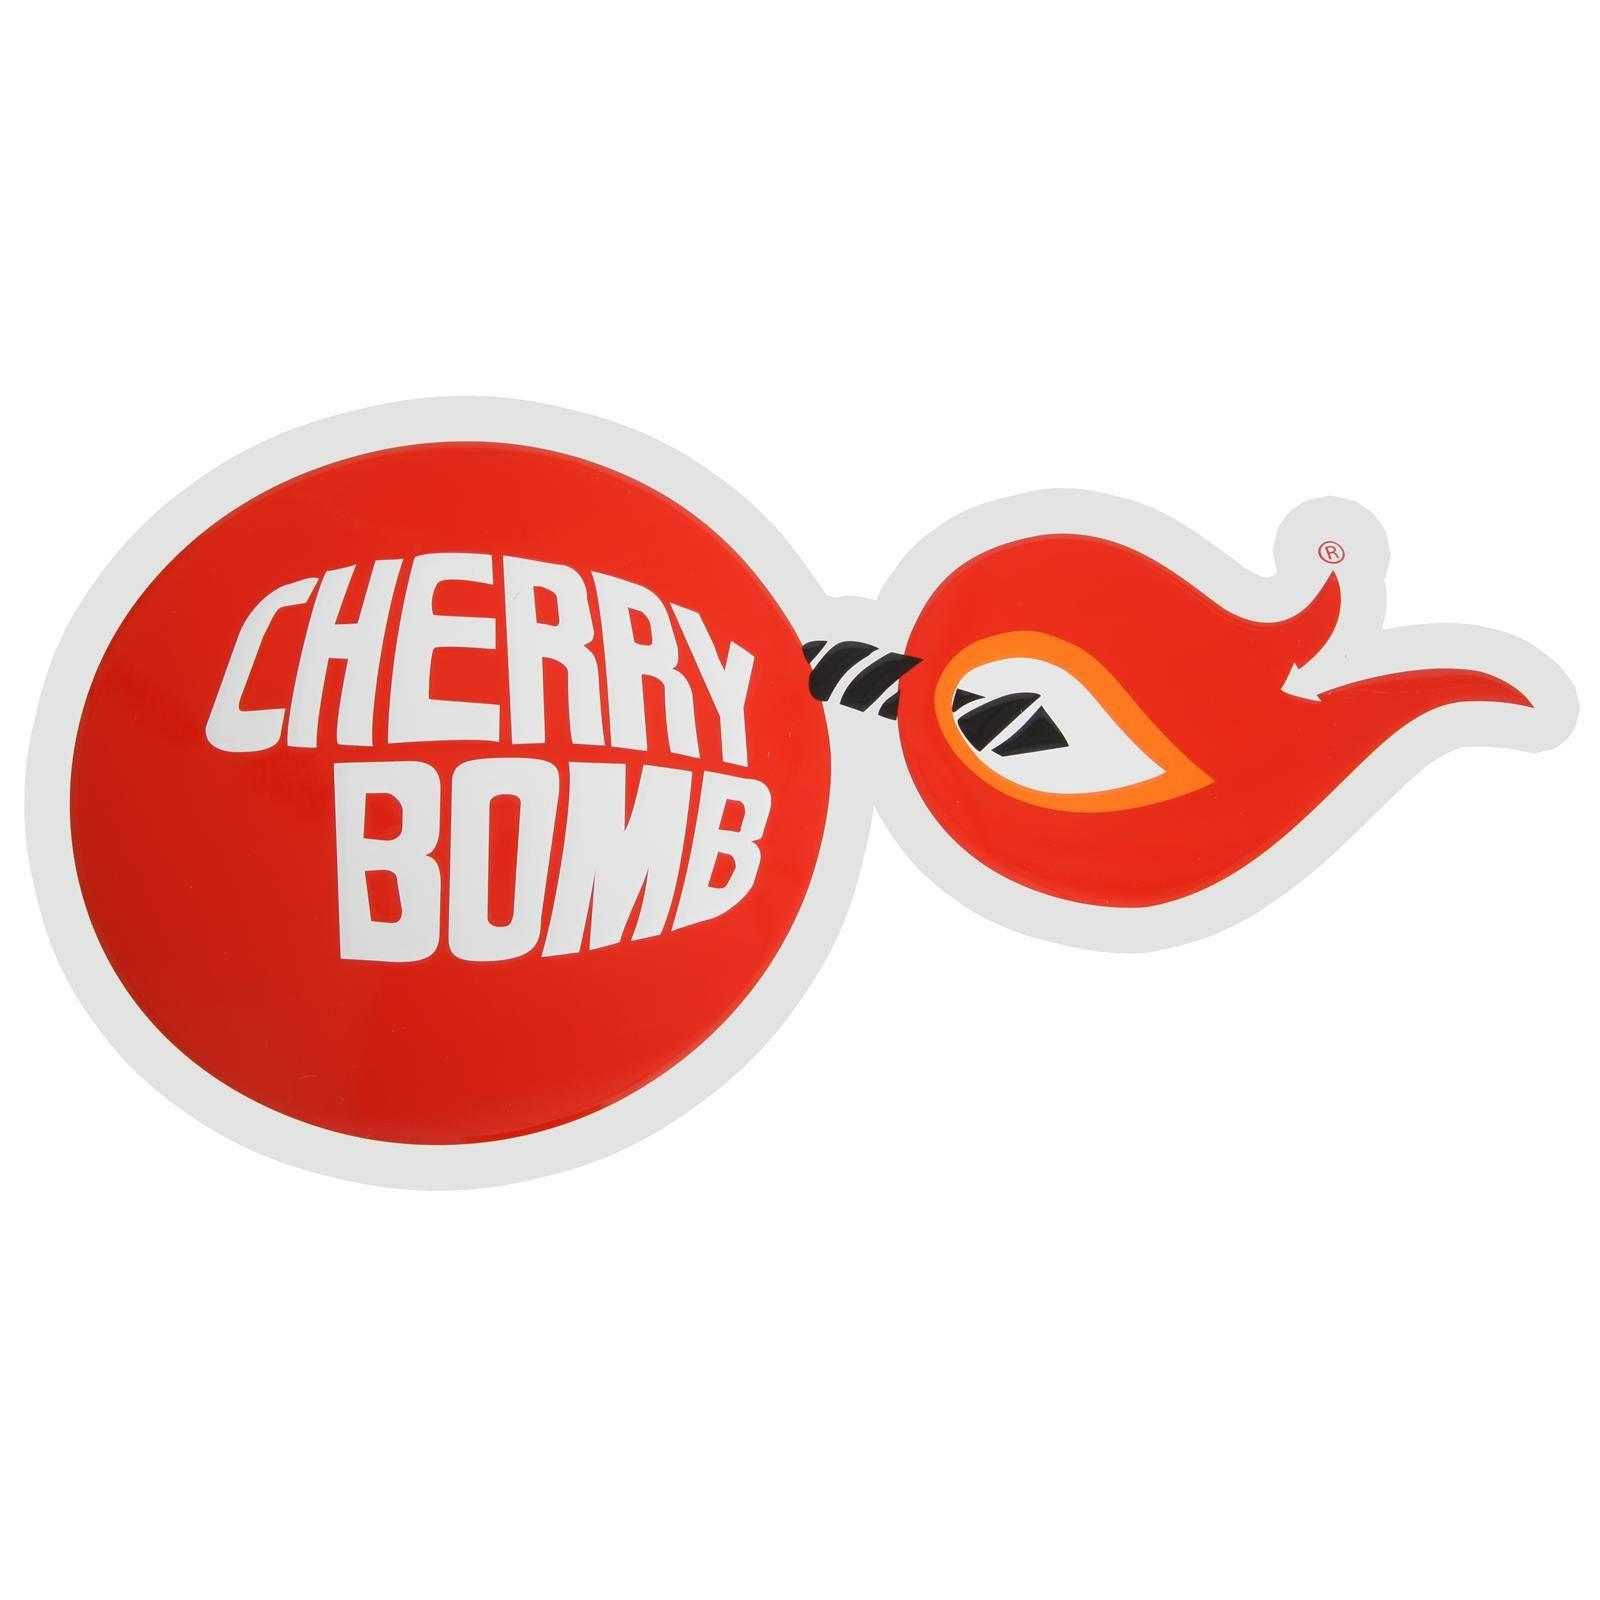 Cherry Bomb Logo - Cherry Bomb Tin Garage Signs NS9800 - Free Shipping on Orders Over ...